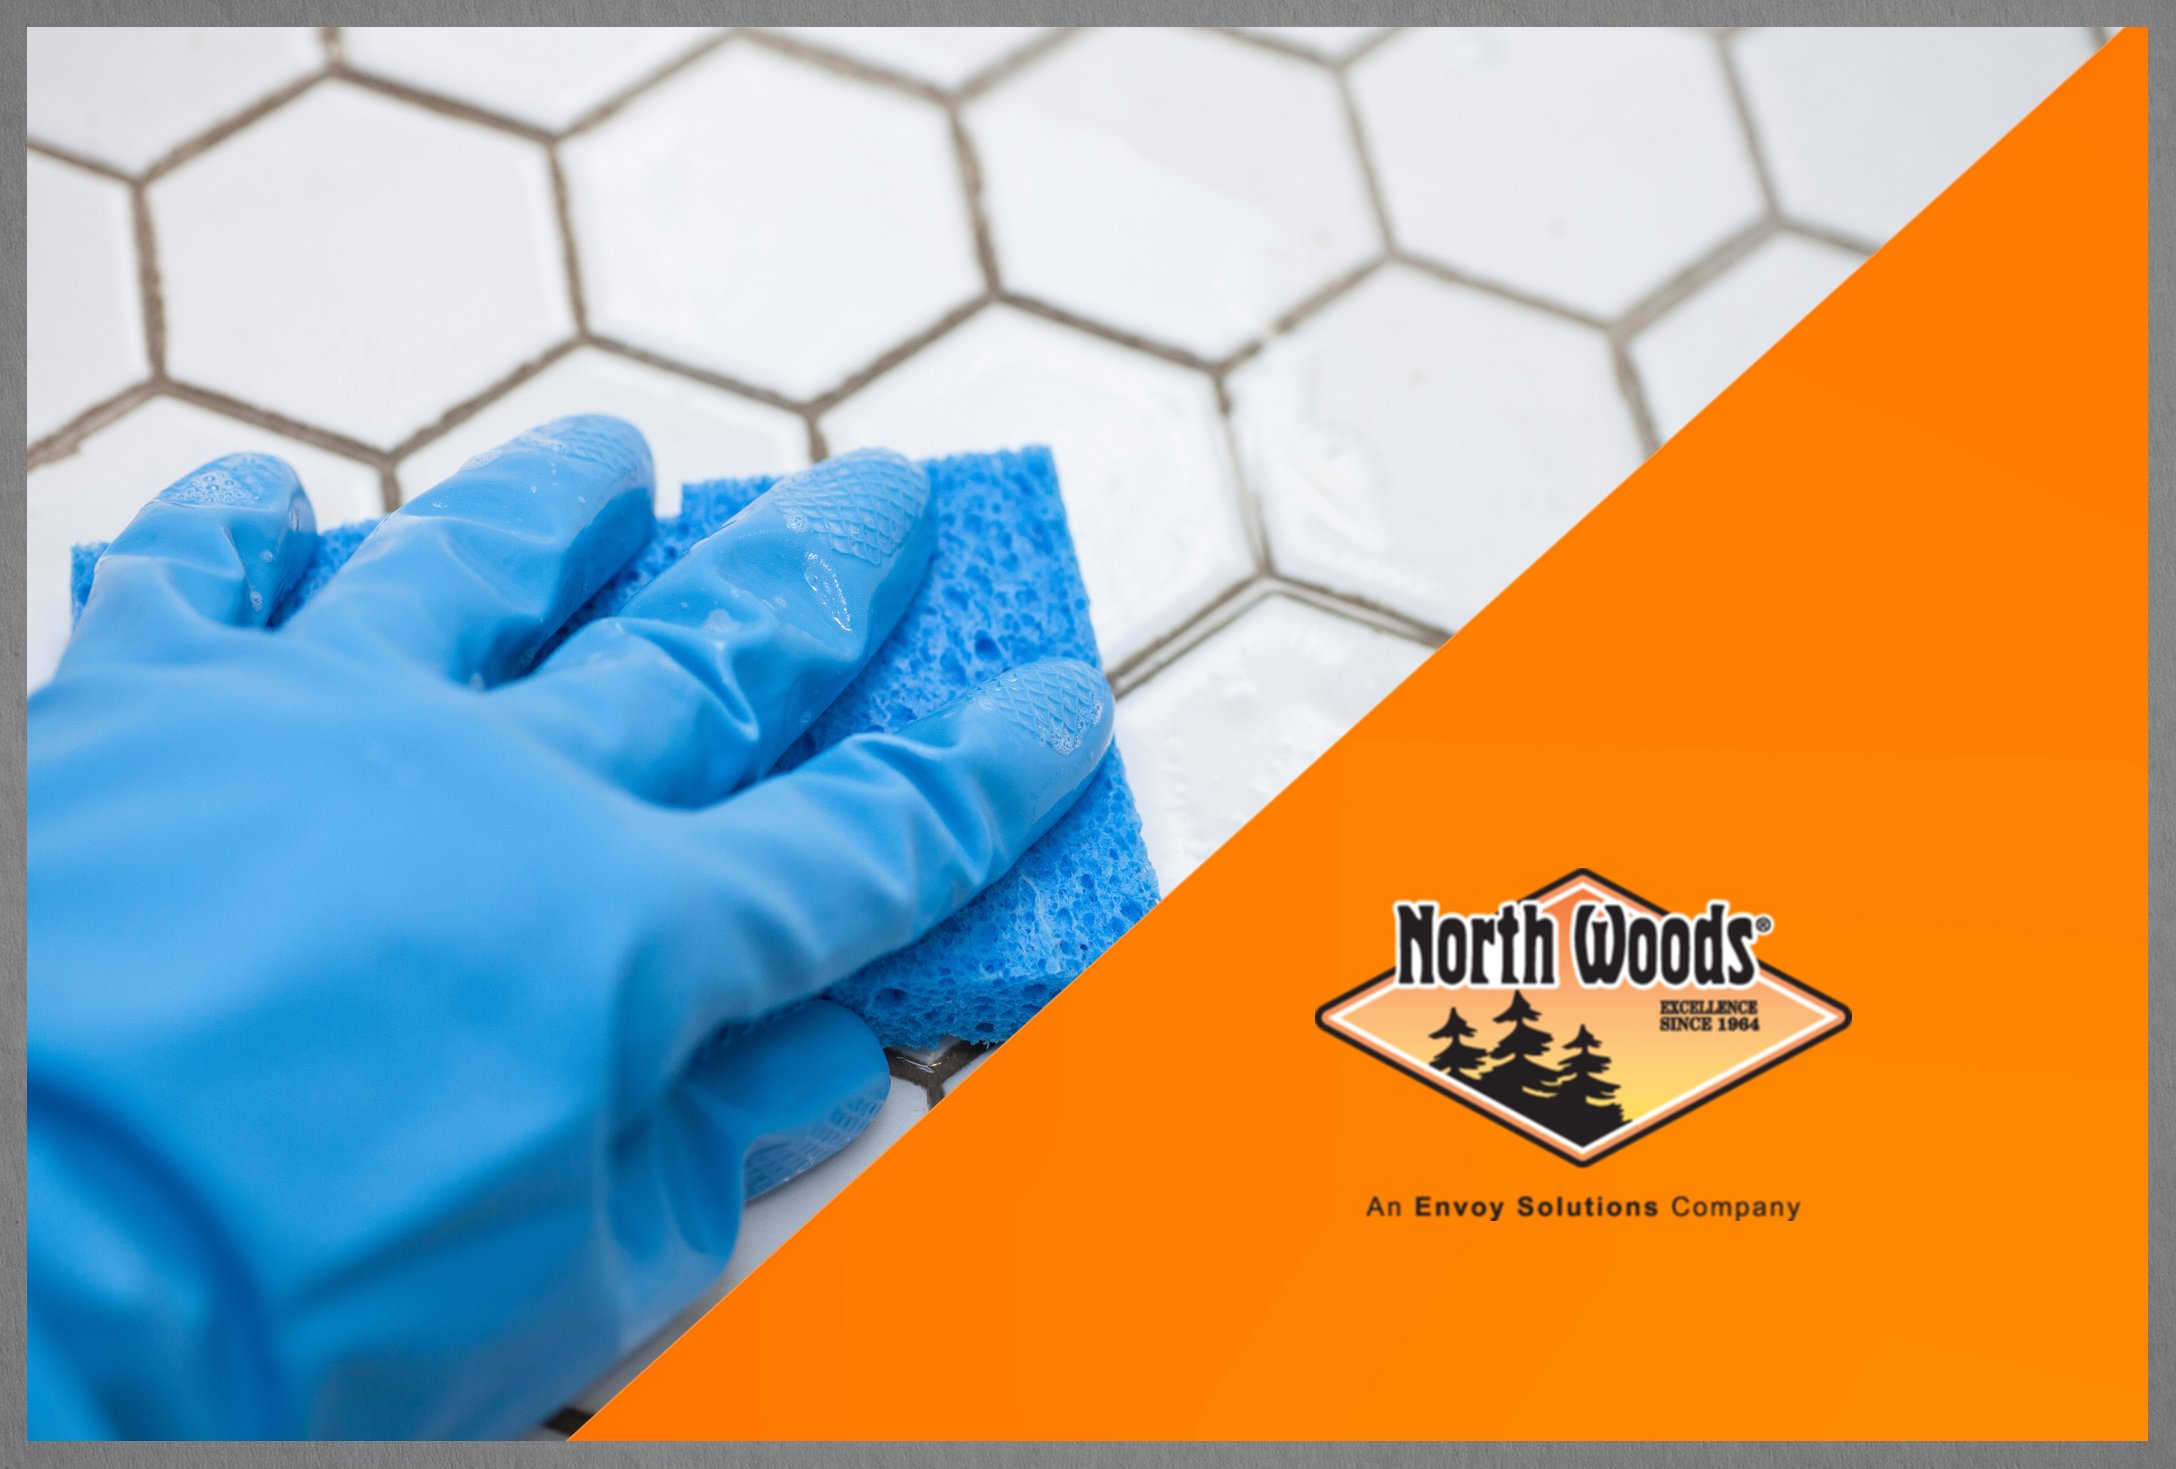 Mold Cleaner - North Woods, An Envoy Solutions Company